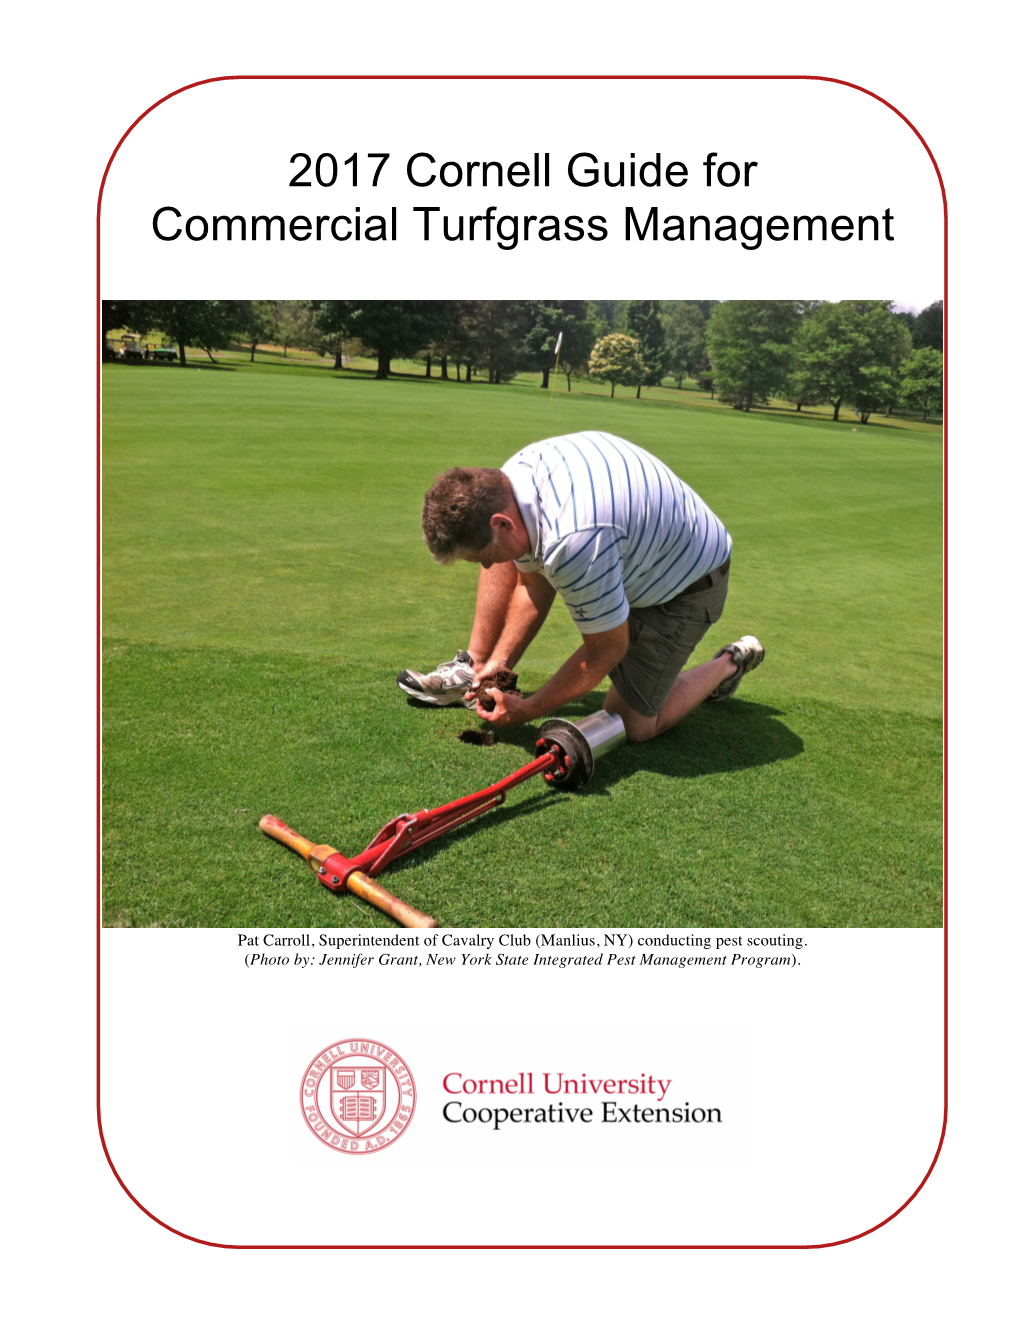 2017 Cornell Guide for Commercial Turfgrass Management